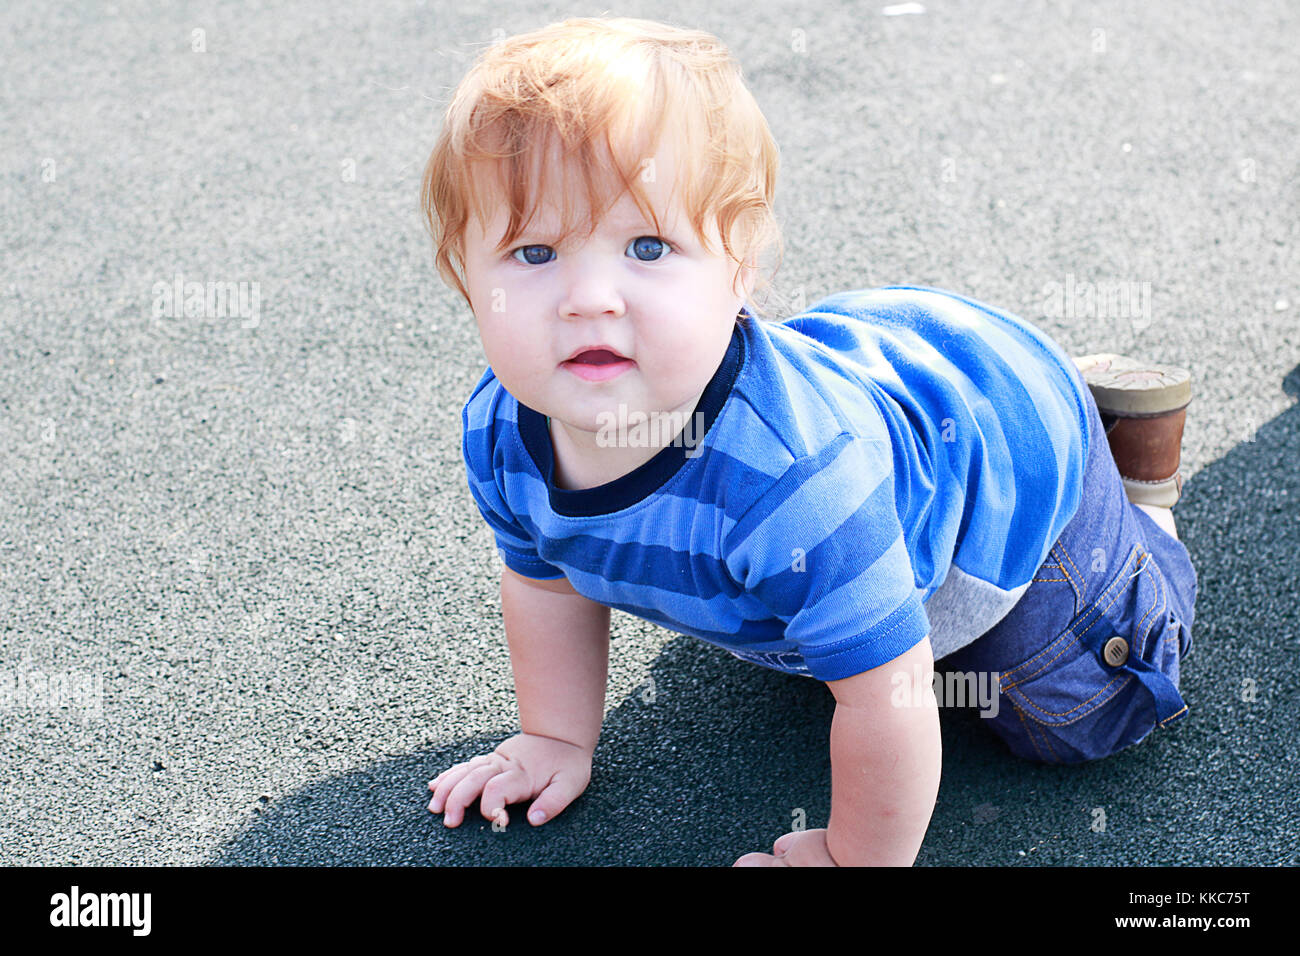 Fashioned ginger toddler boy with blue eyes staying on all fours on the play ground and watching on camera. Stock Photo